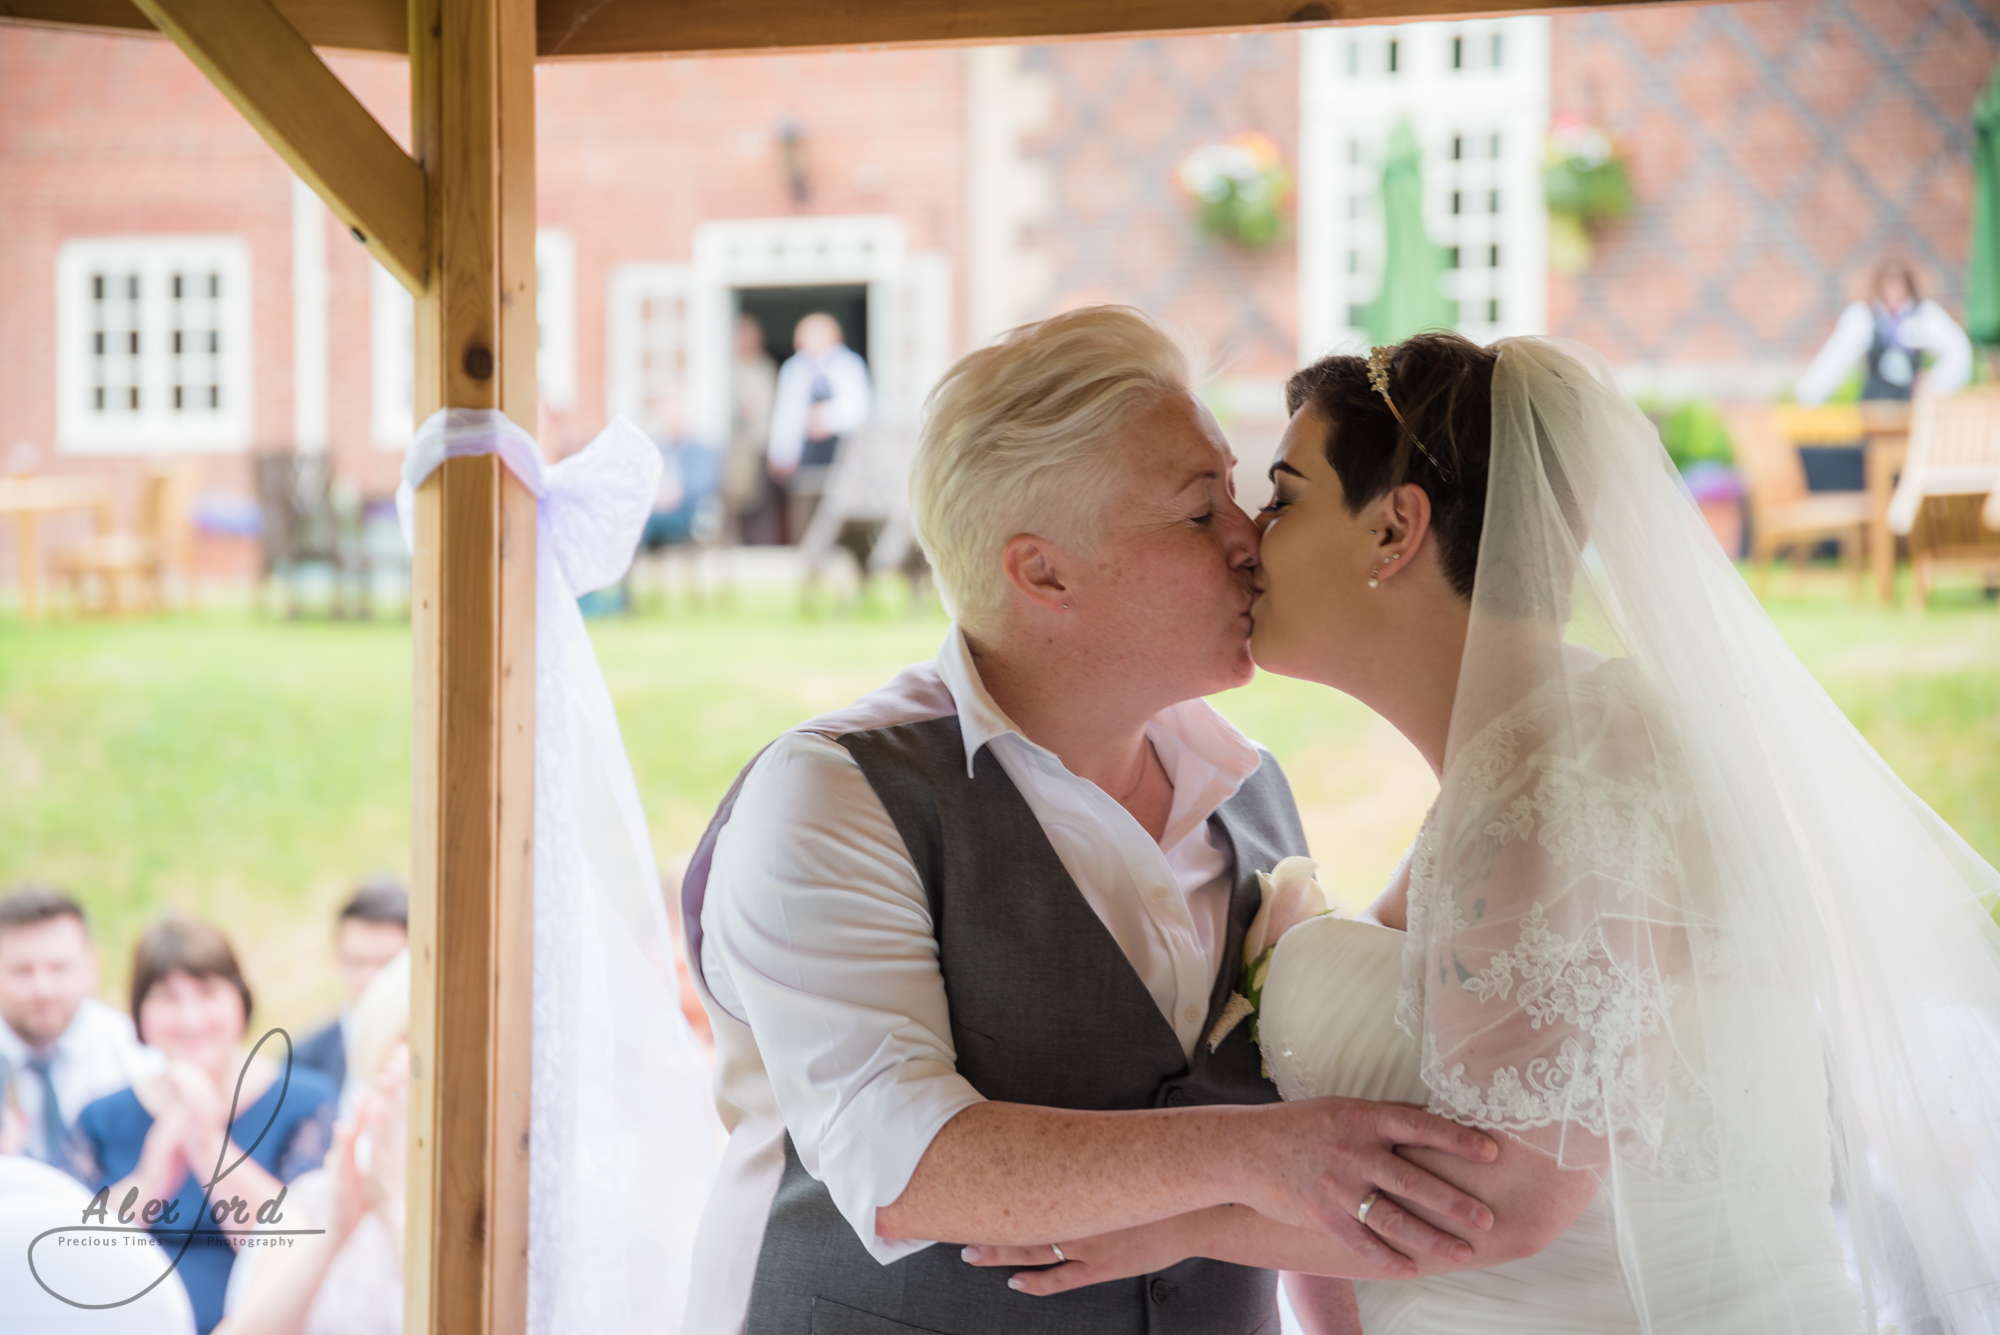 the bride and bride share their first kiss as a married couple